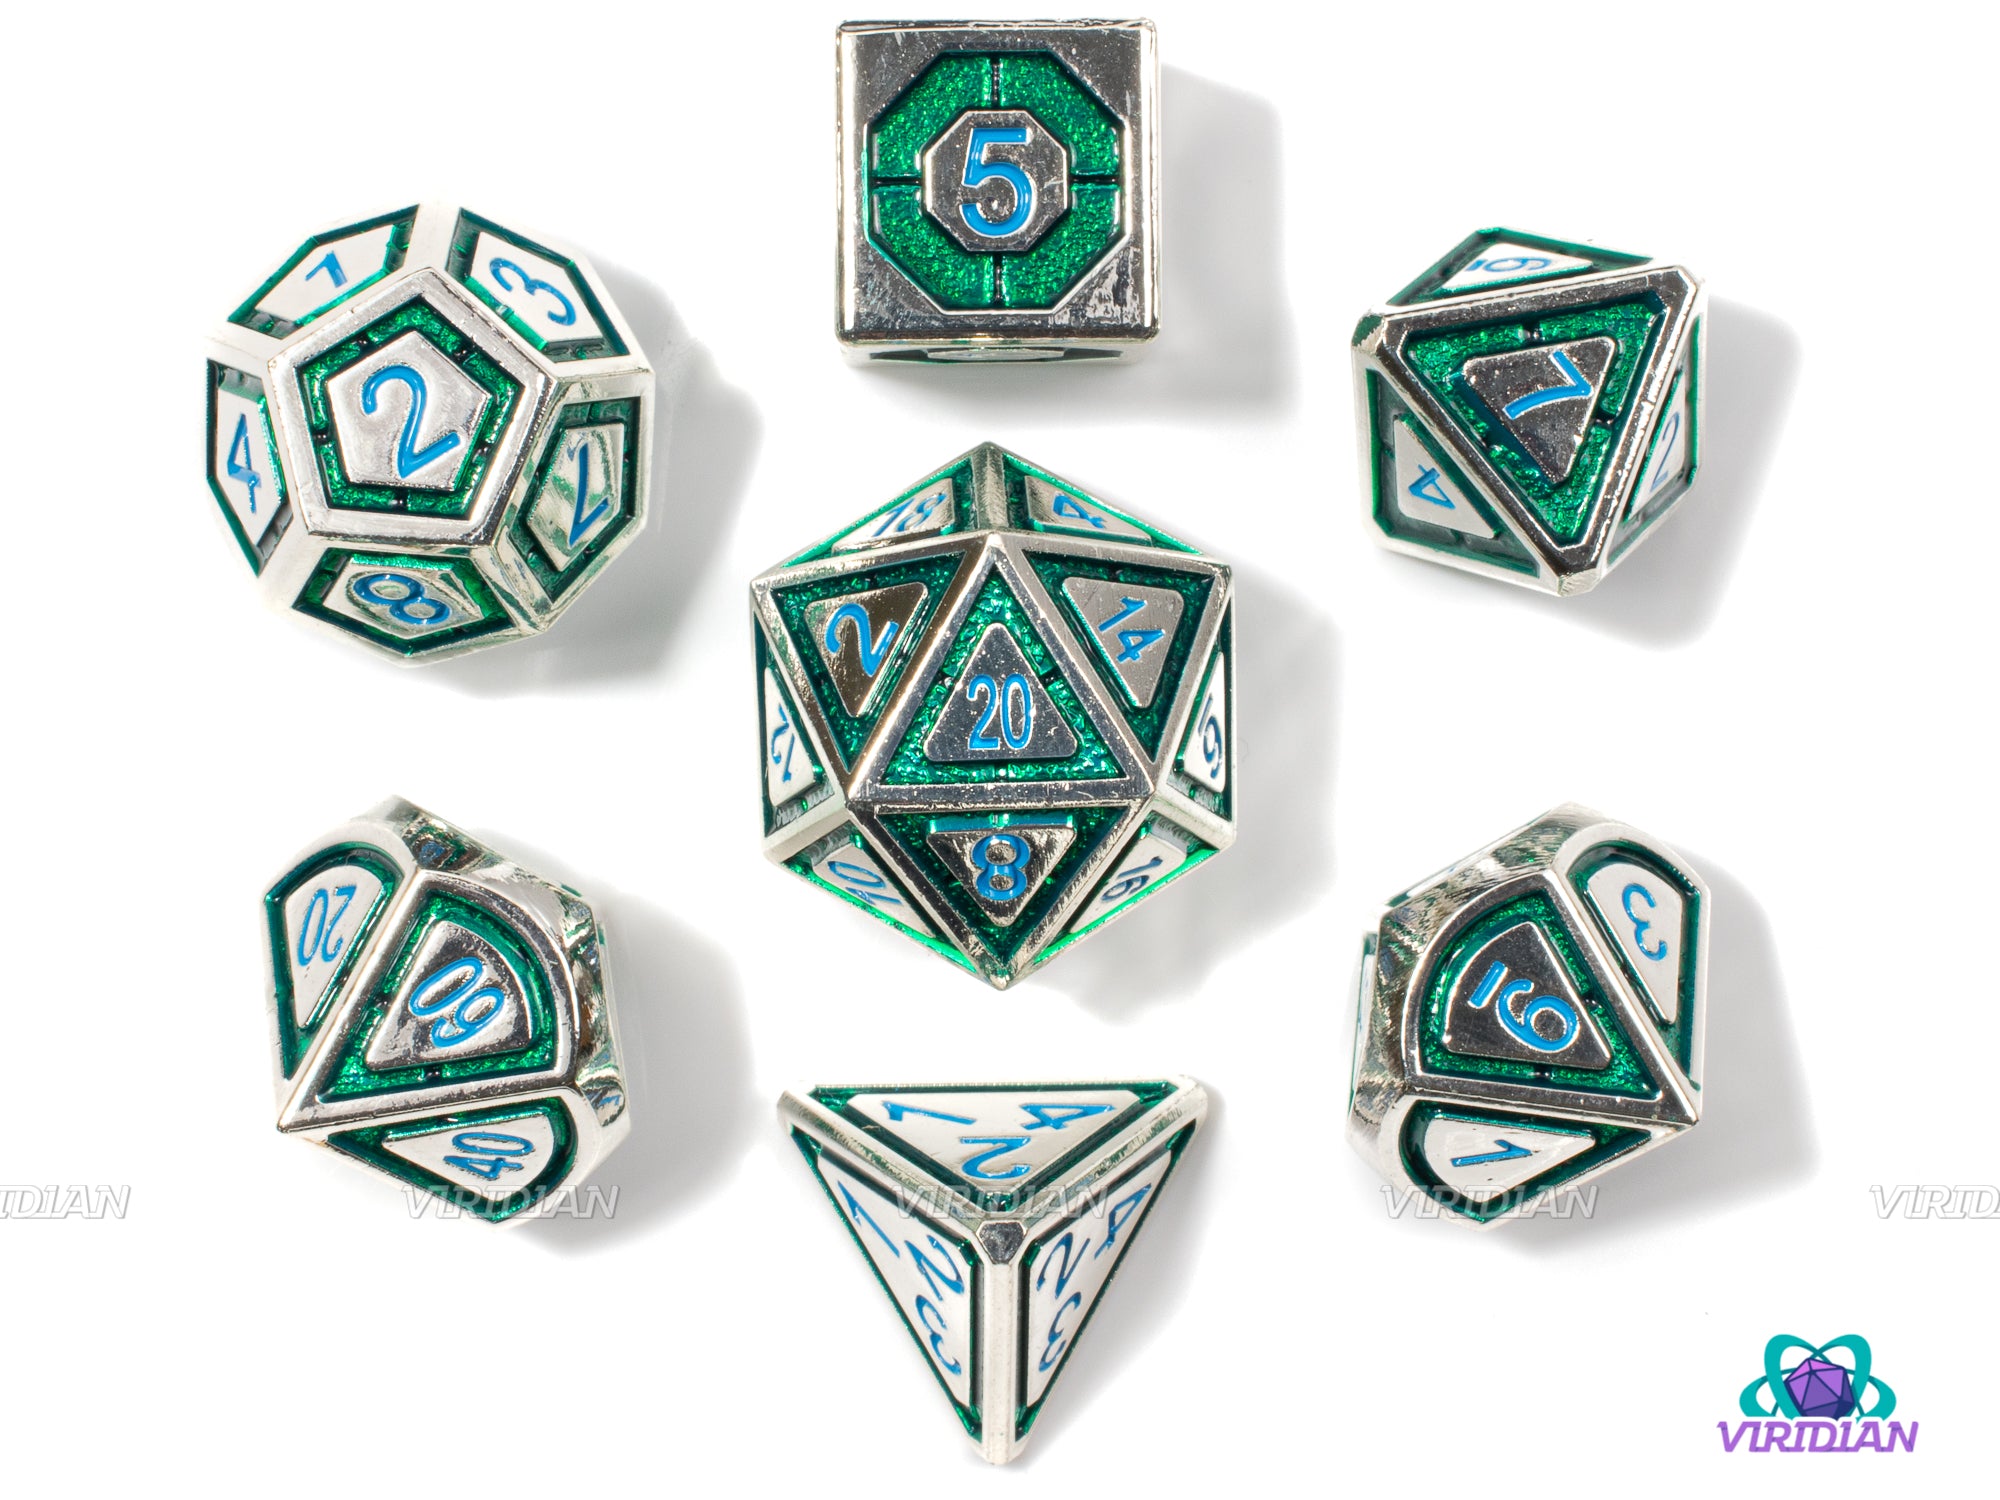 Emerald Isle | Silver & Green, Blue Ink Metal Dice Set (7) | Dungeons and Dragons (DnD) | Tabletop RPG Gaming